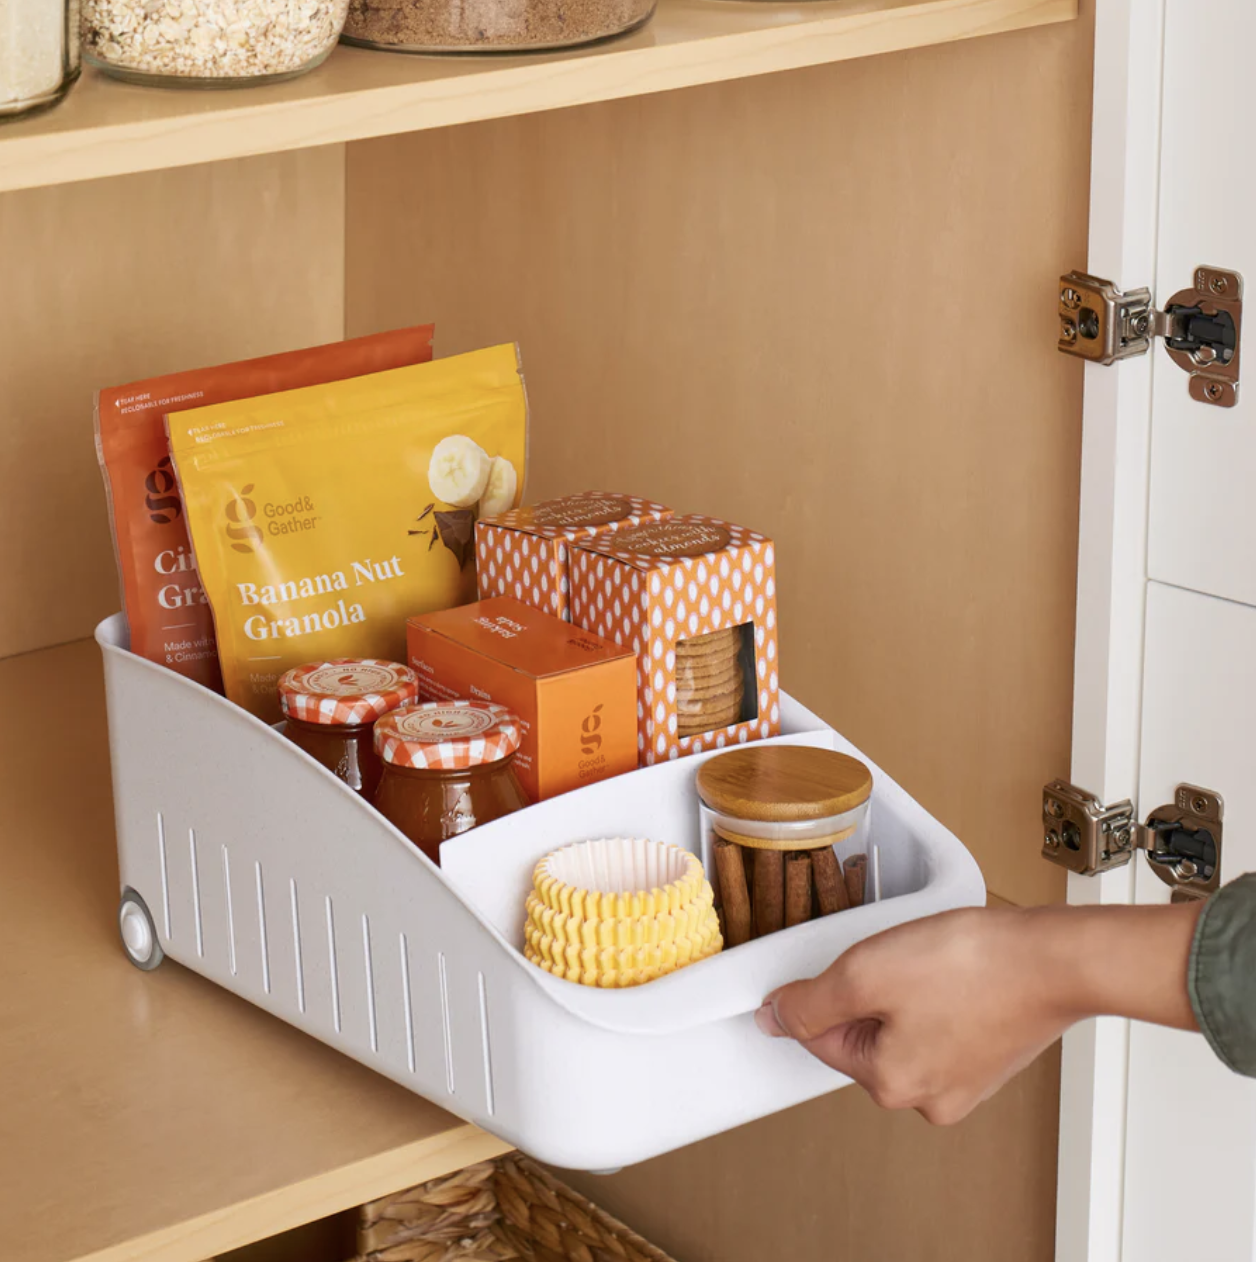 YouCopia® SinkSuite® Under Sink Cleaning Caddy